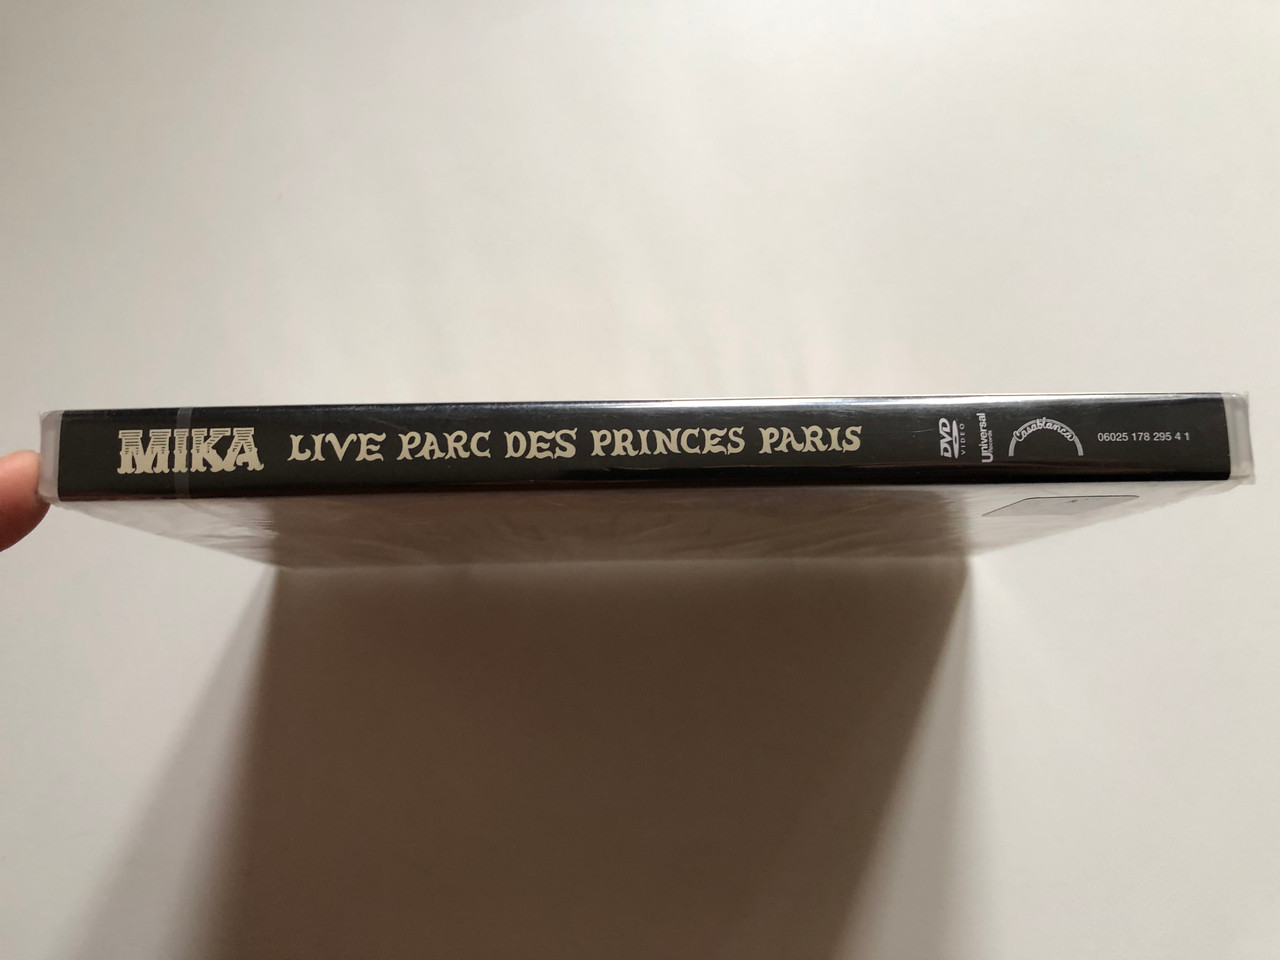 https://cdn11.bigcommerce.com/s-62bdpkt7pb/products/0/images/321930/MIKA_Live_Parc_Des_Princes_Paris_Full_live_show_from_Parc_des_Princes_Stadium_Paris_Including_Brand_New_Track_Rain_Extras_include_making_of_the_show_Documentary_Universal_Records_DV_3__57914.1705593119.1280.1280.JPG?c=2